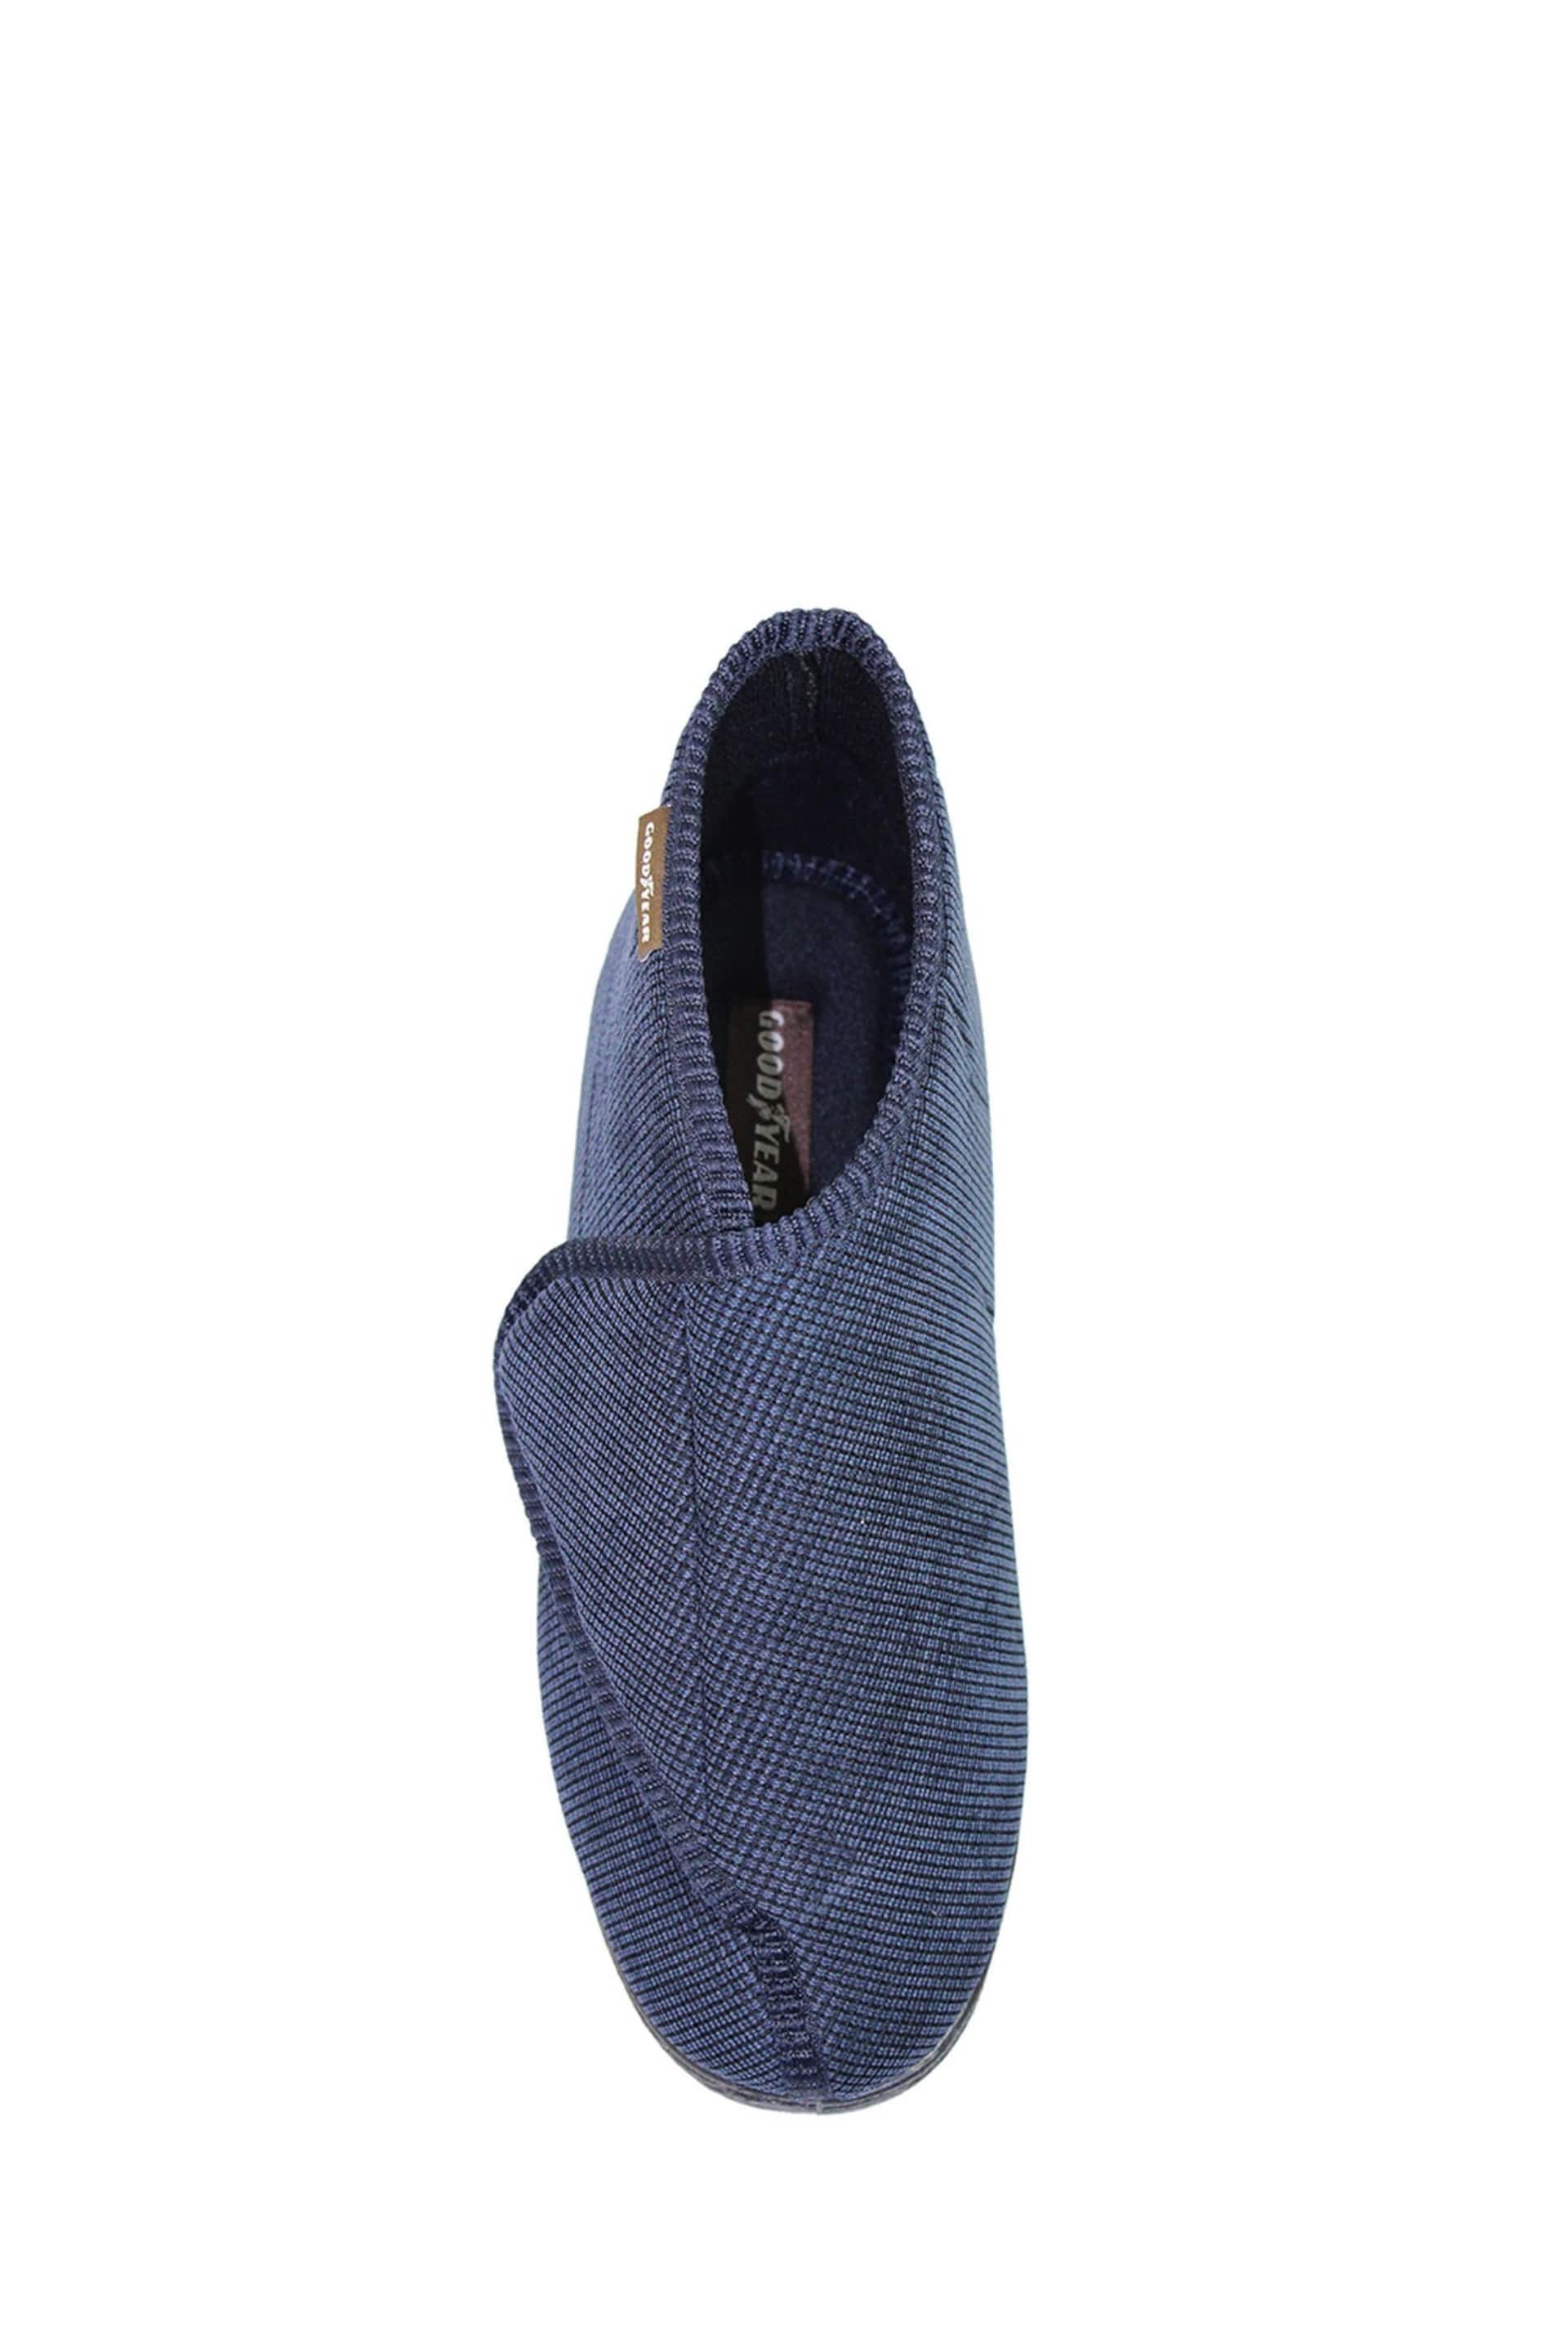 Goodyear Grey Drake Blue One Touch Bootee Slippers - Image 4 of 4